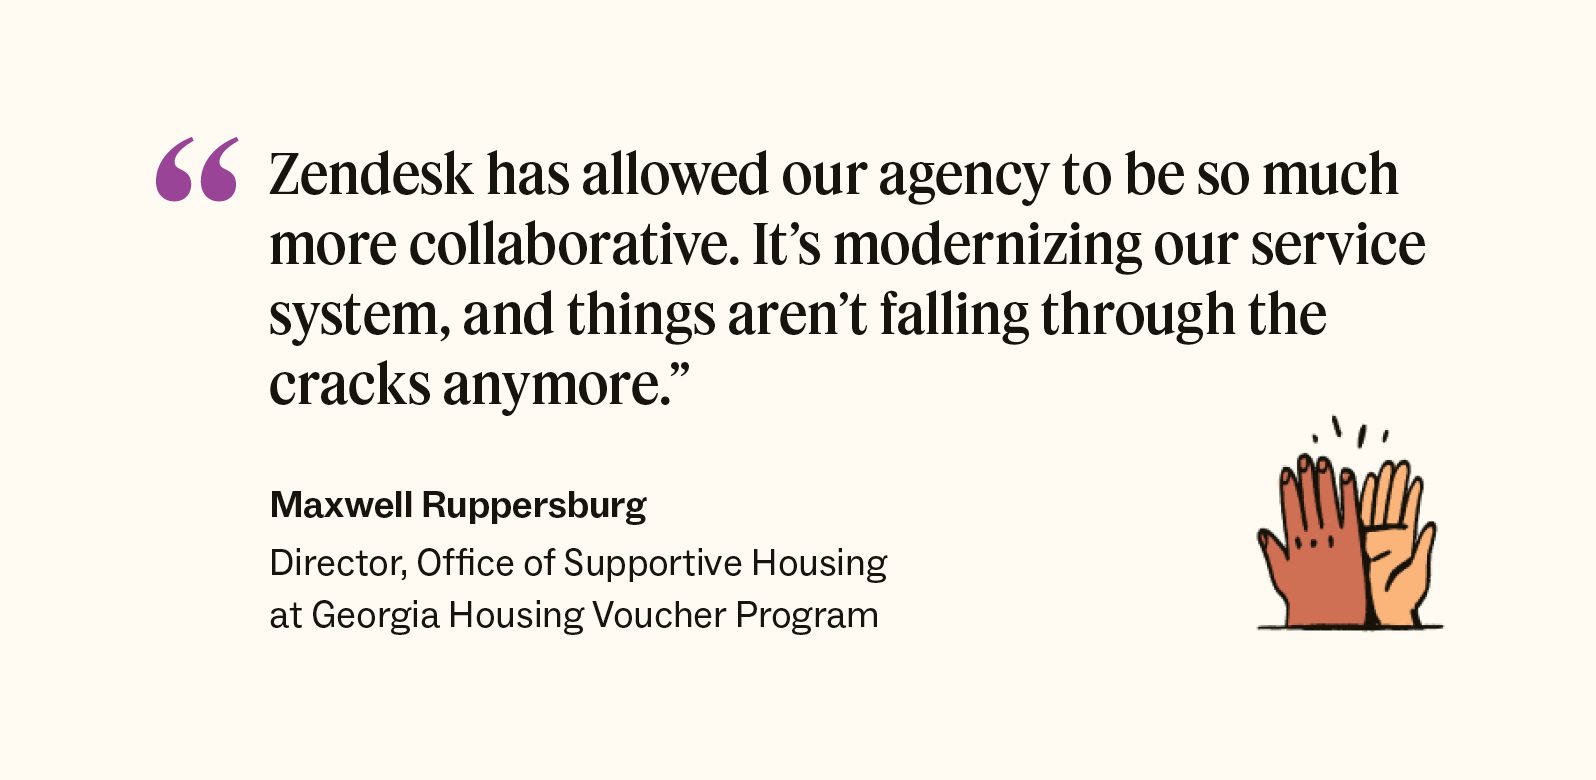 Georgia Housing Voucher Program's Director, Office of Supportive Housing quote